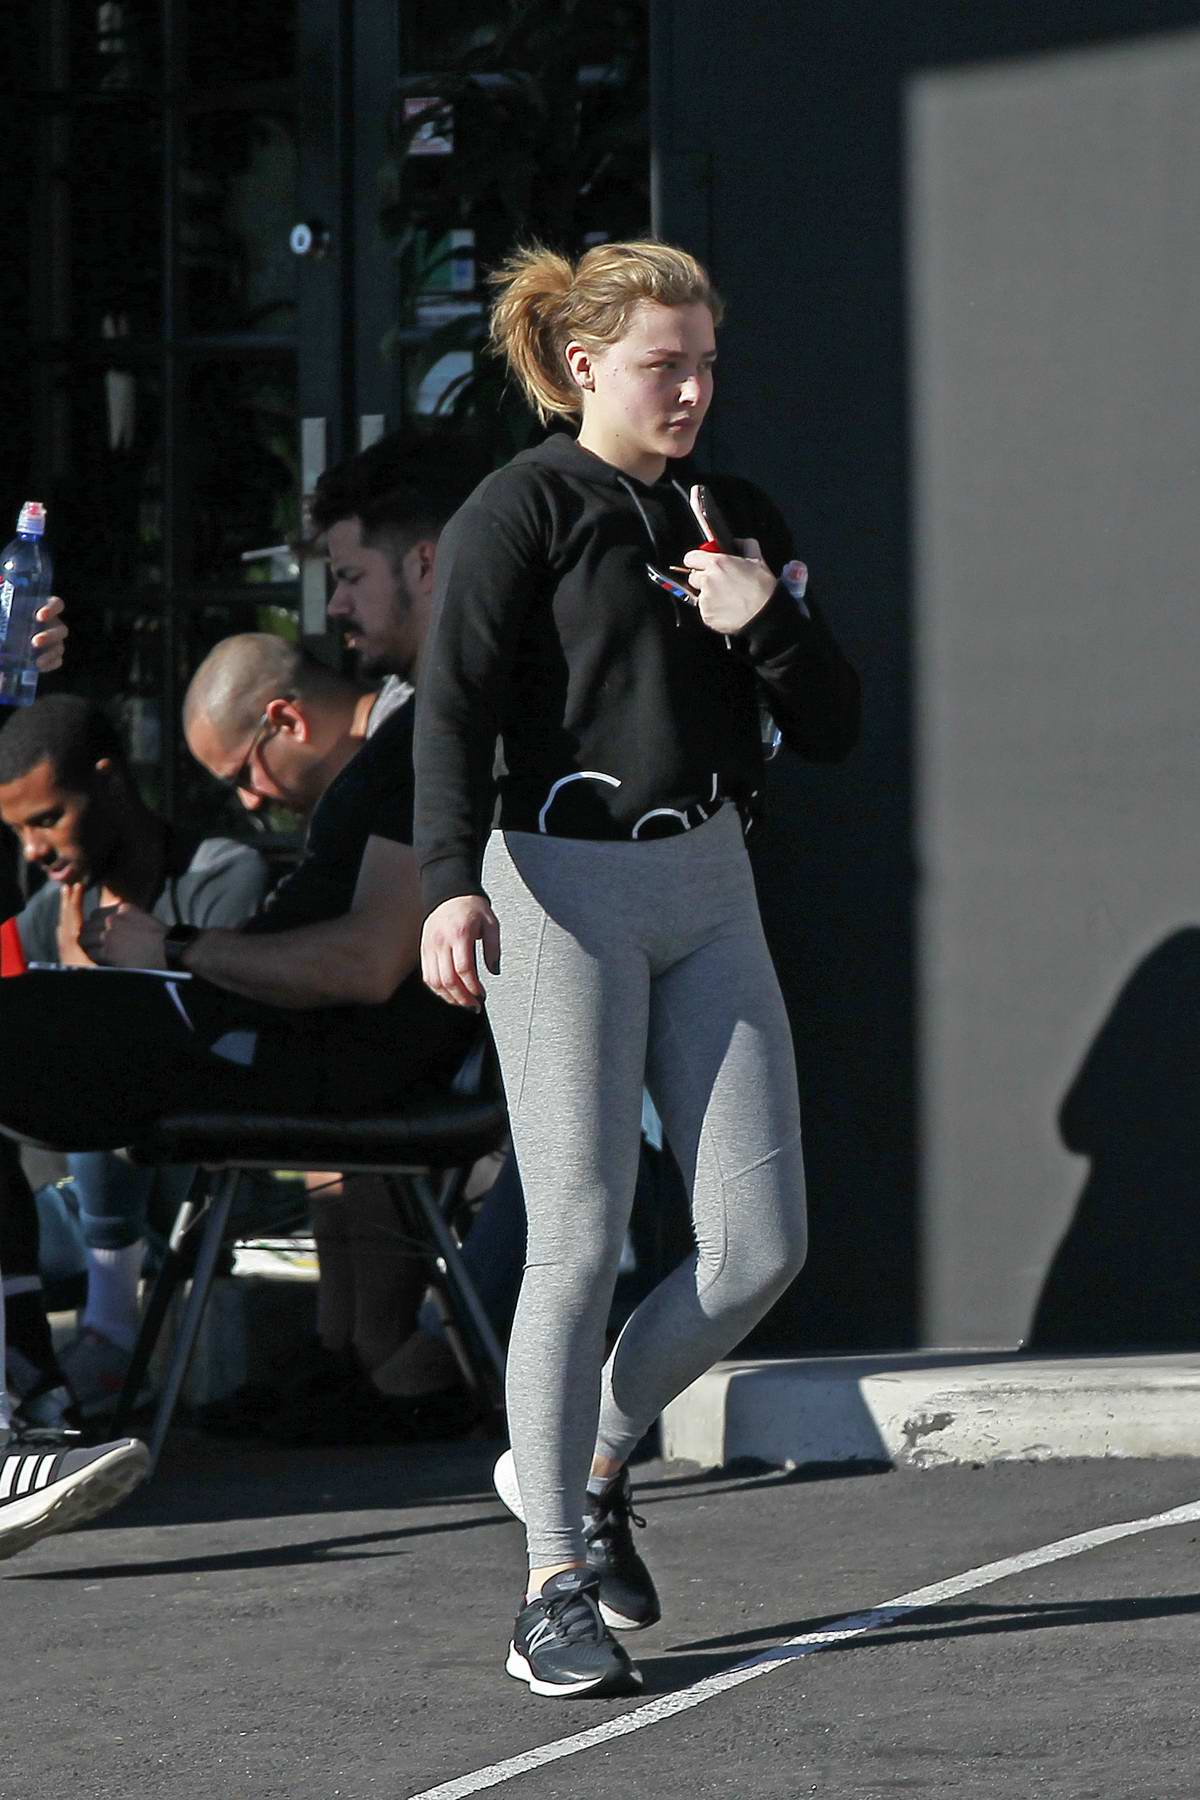 https://www.celebsfirst.com/wp-content/uploads/2018/11/chloe-grace-moretz-wears-a-calvin-klein-hoodie-and-grey-leggings-as-she-leaves-the-gym-in-los-angeles-261118_7.jpg